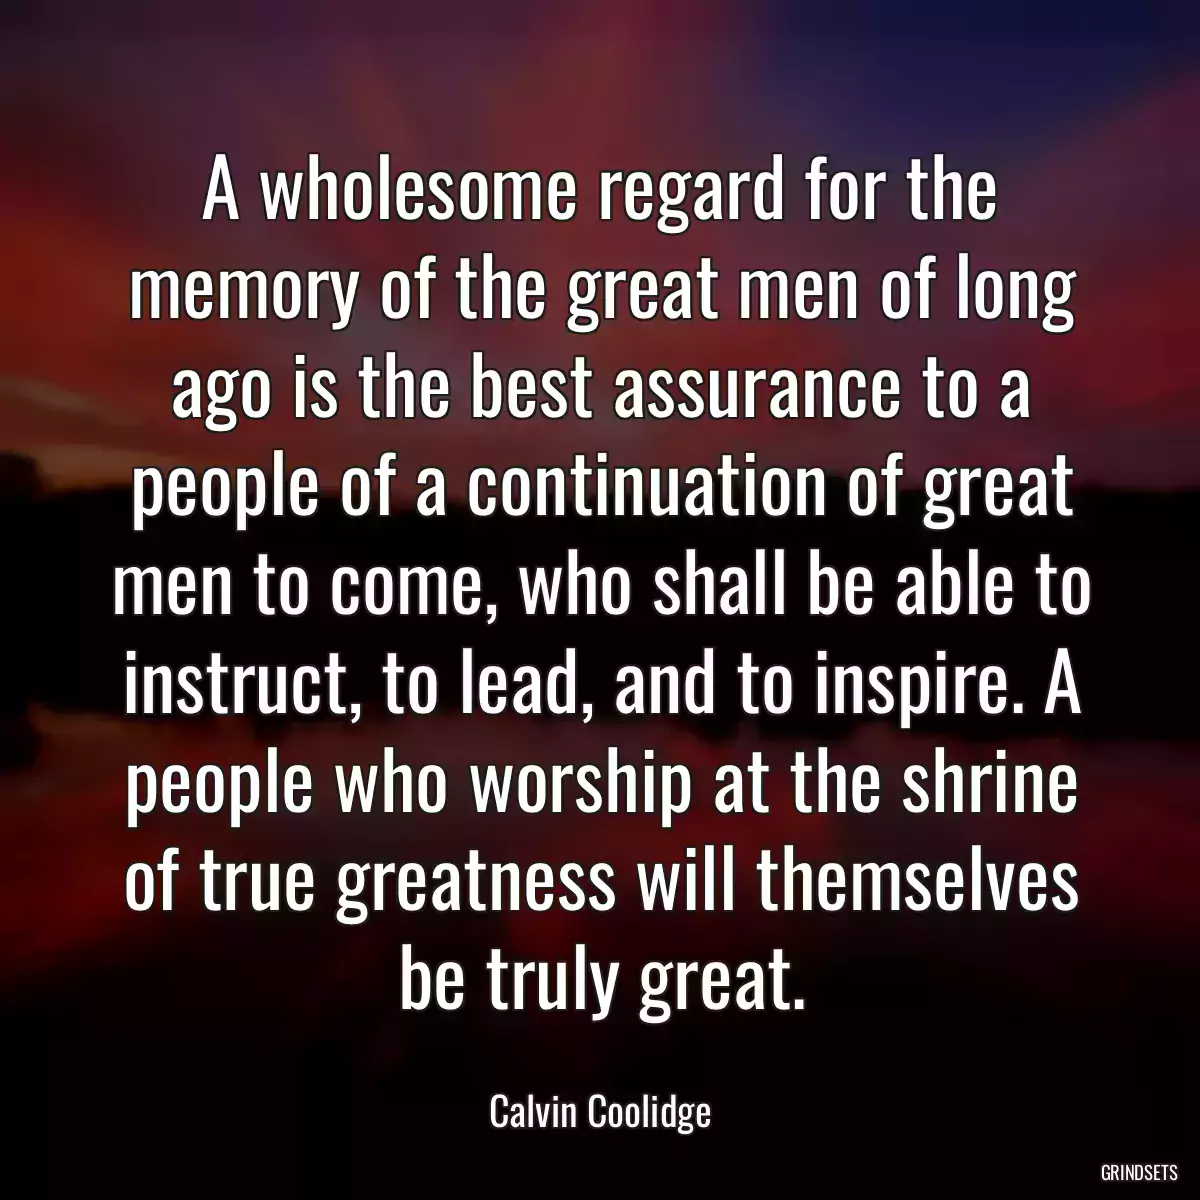 A wholesome regard for the memory of the great men of long ago is the best assurance to a people of a continuation of great men to come, who shall be able to instruct, to lead, and to inspire. A people who worship at the shrine of true greatness will themselves be truly great.